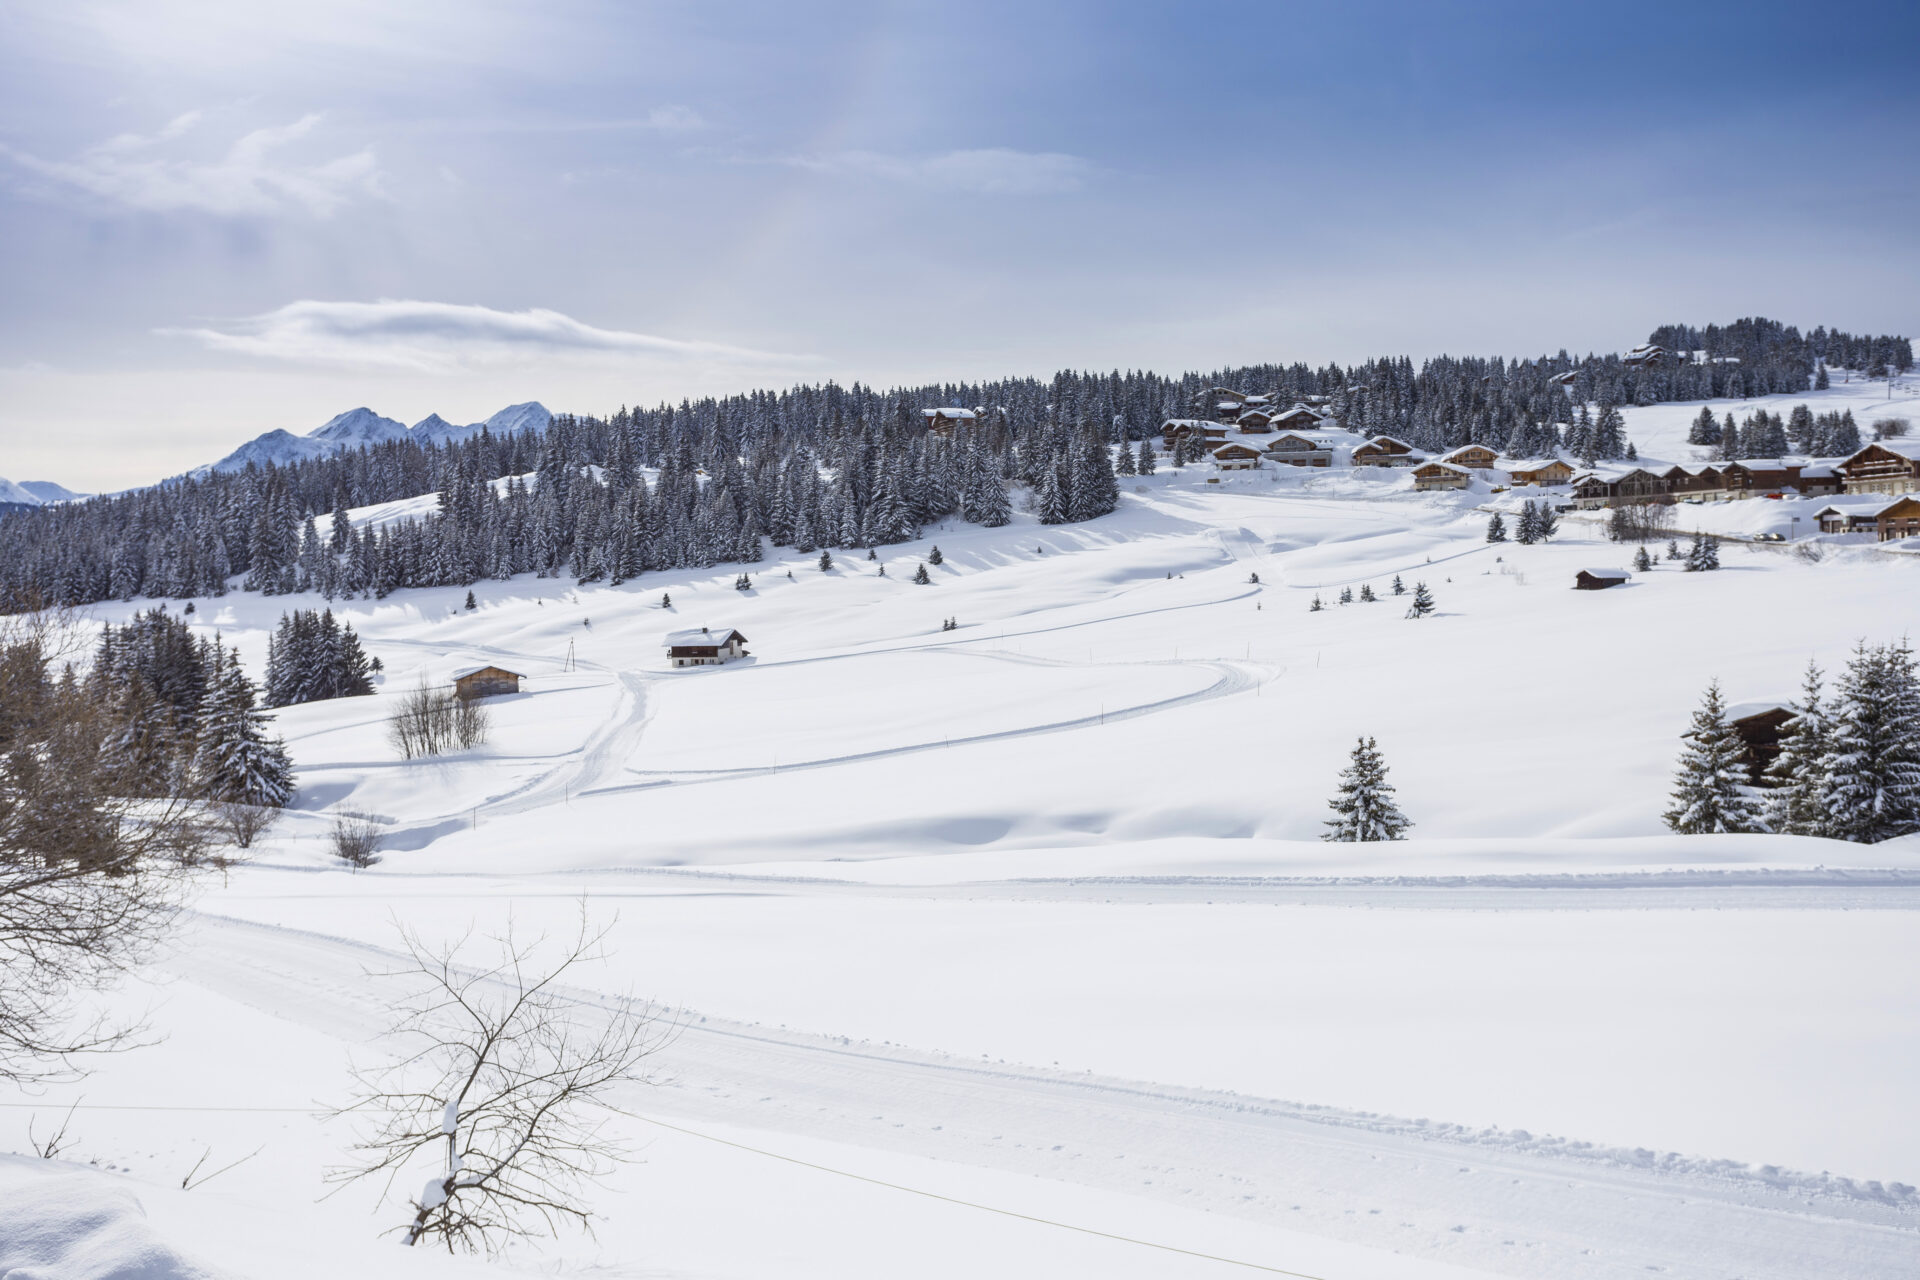 An image of the pistes in Les Saisies